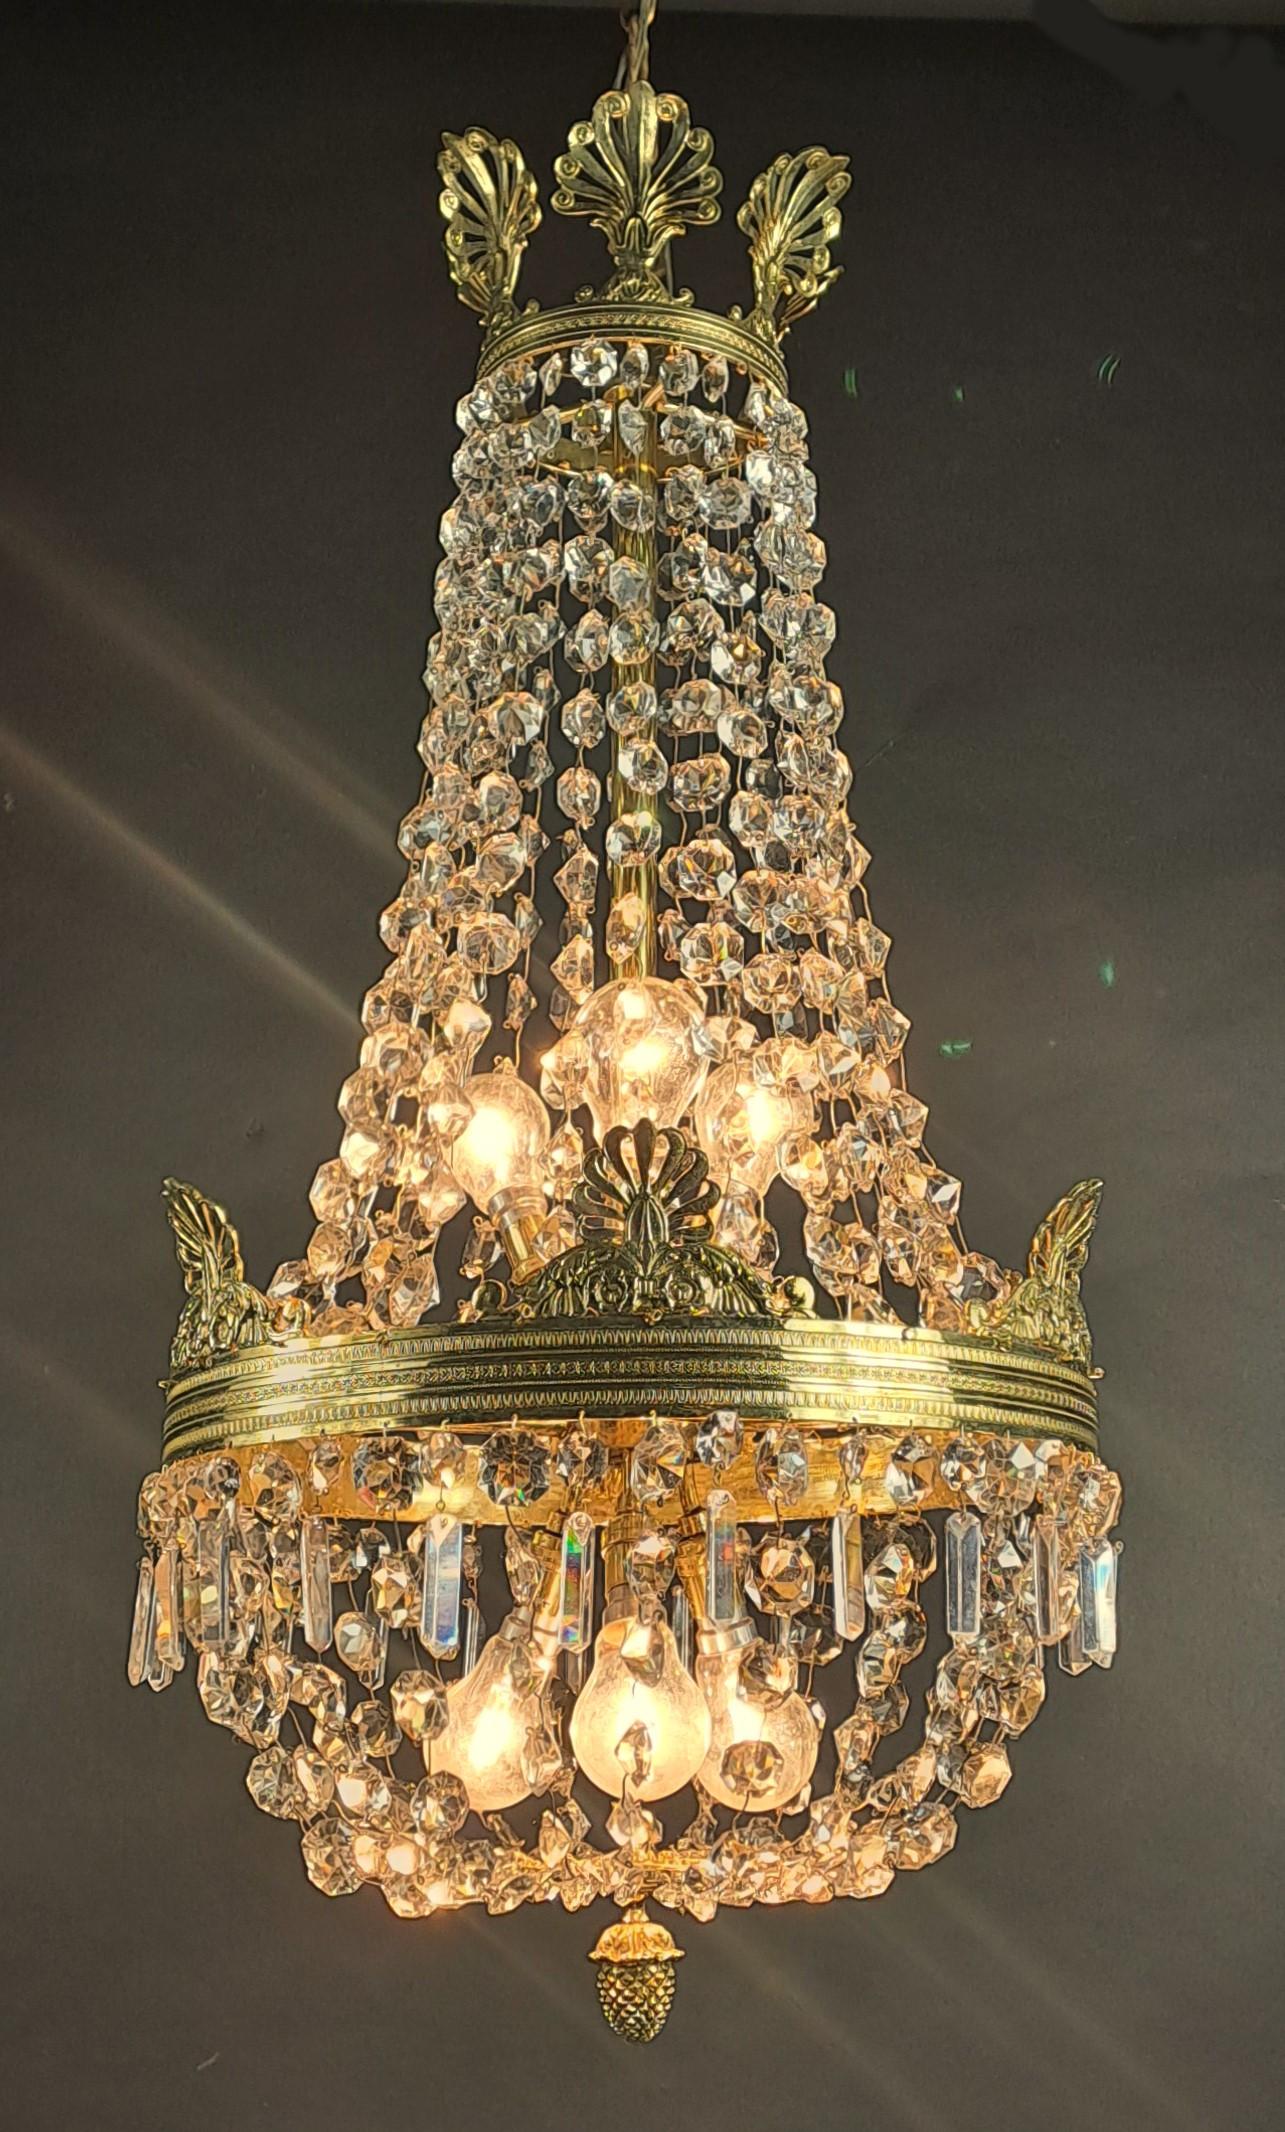 Hot air balloon chandelier in gilded bronze decorated with crystal garlands, Empire style decorated with palmettes and pine cones.

Illuminated by six lights.

Beautiful and very elegant model, French work of quality from the mid-20th century.

Very